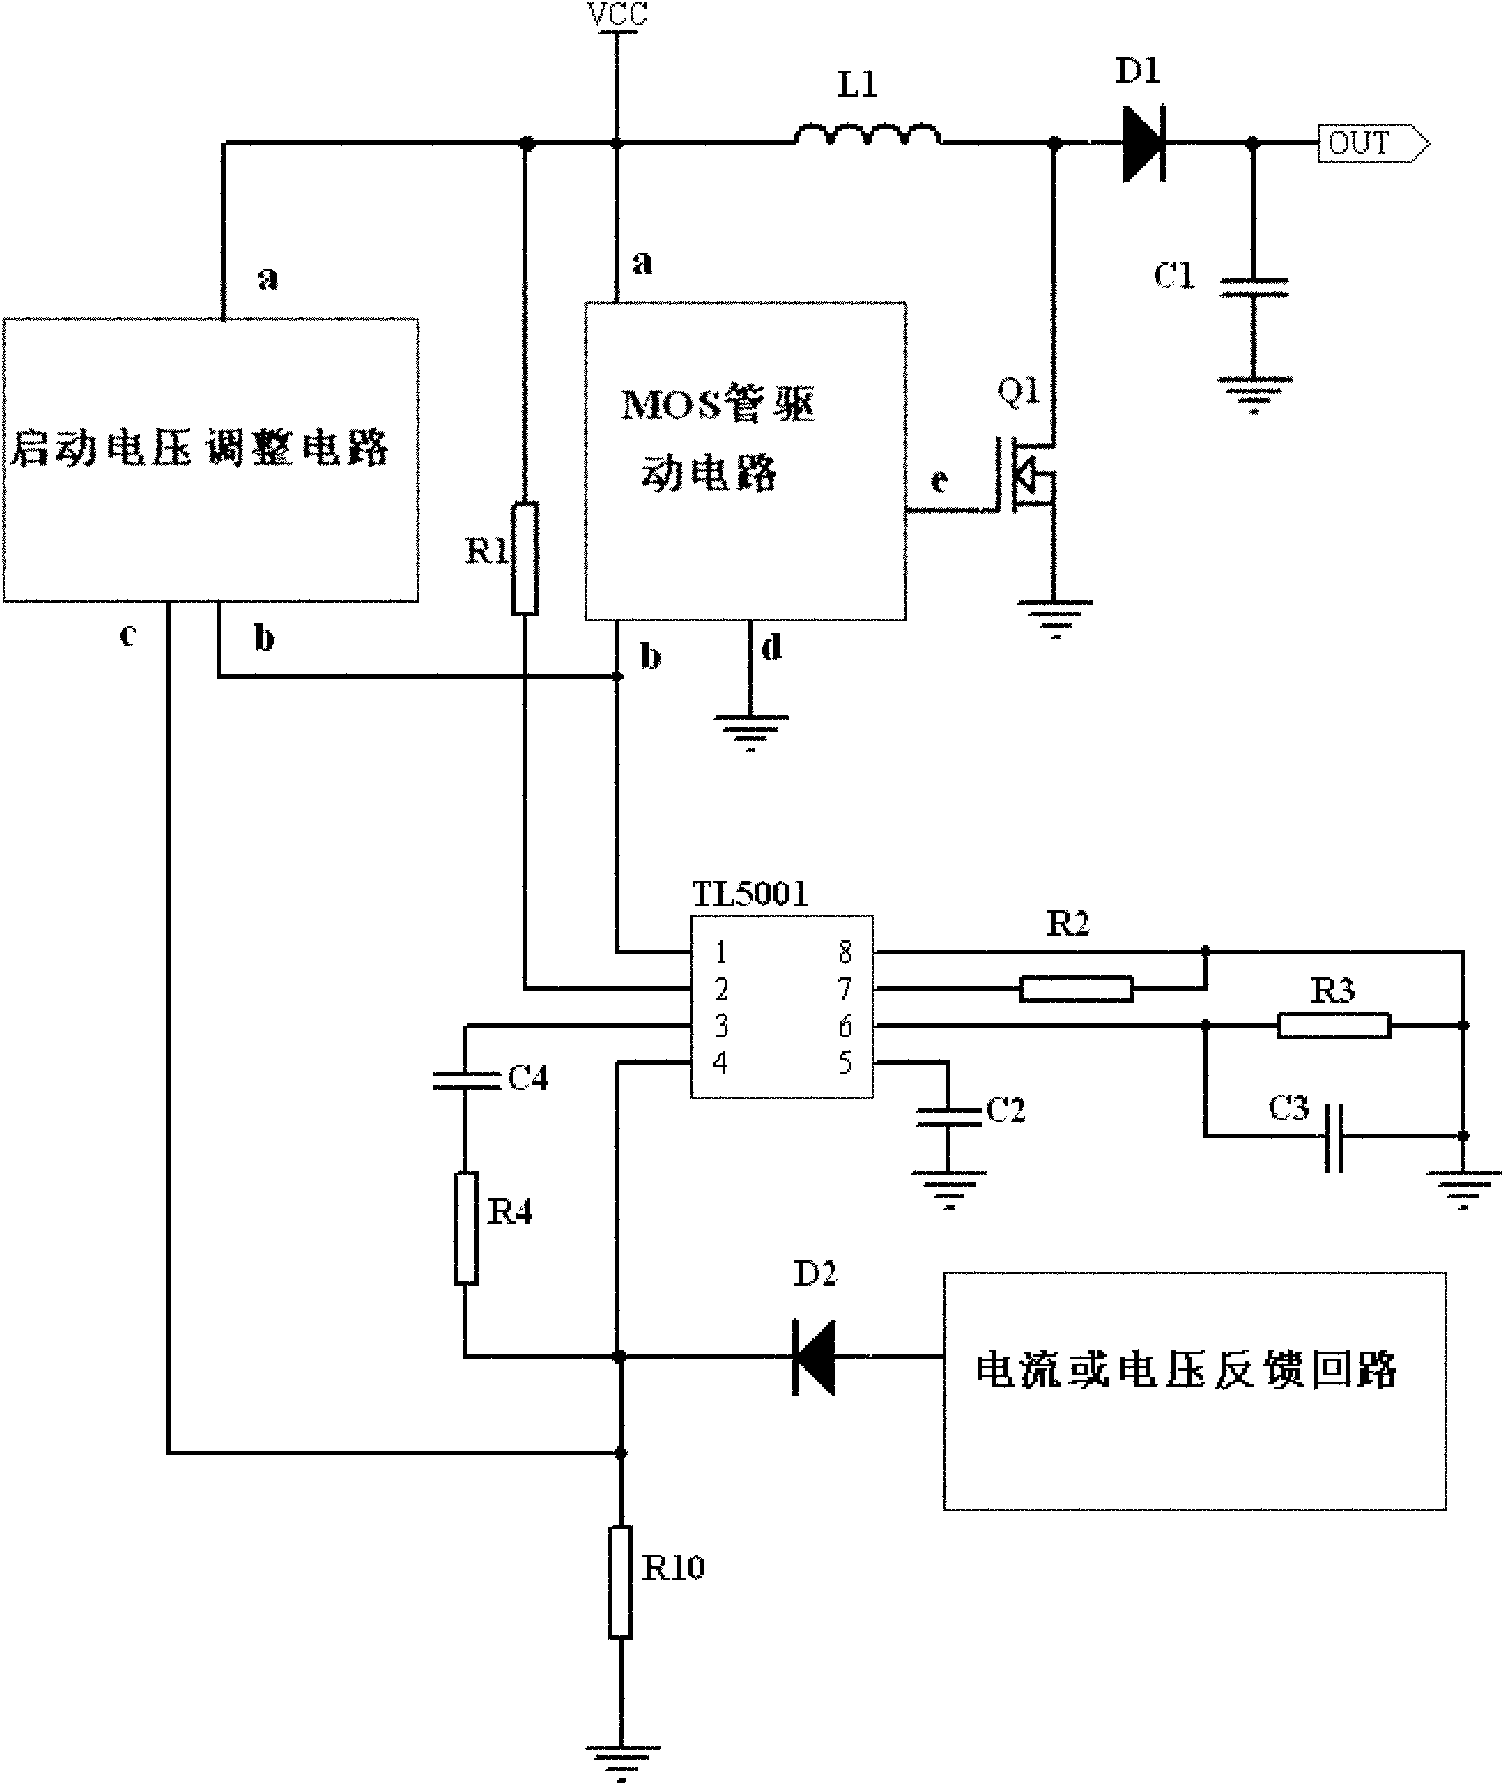 BOOST circuit with adjusting starting voltage